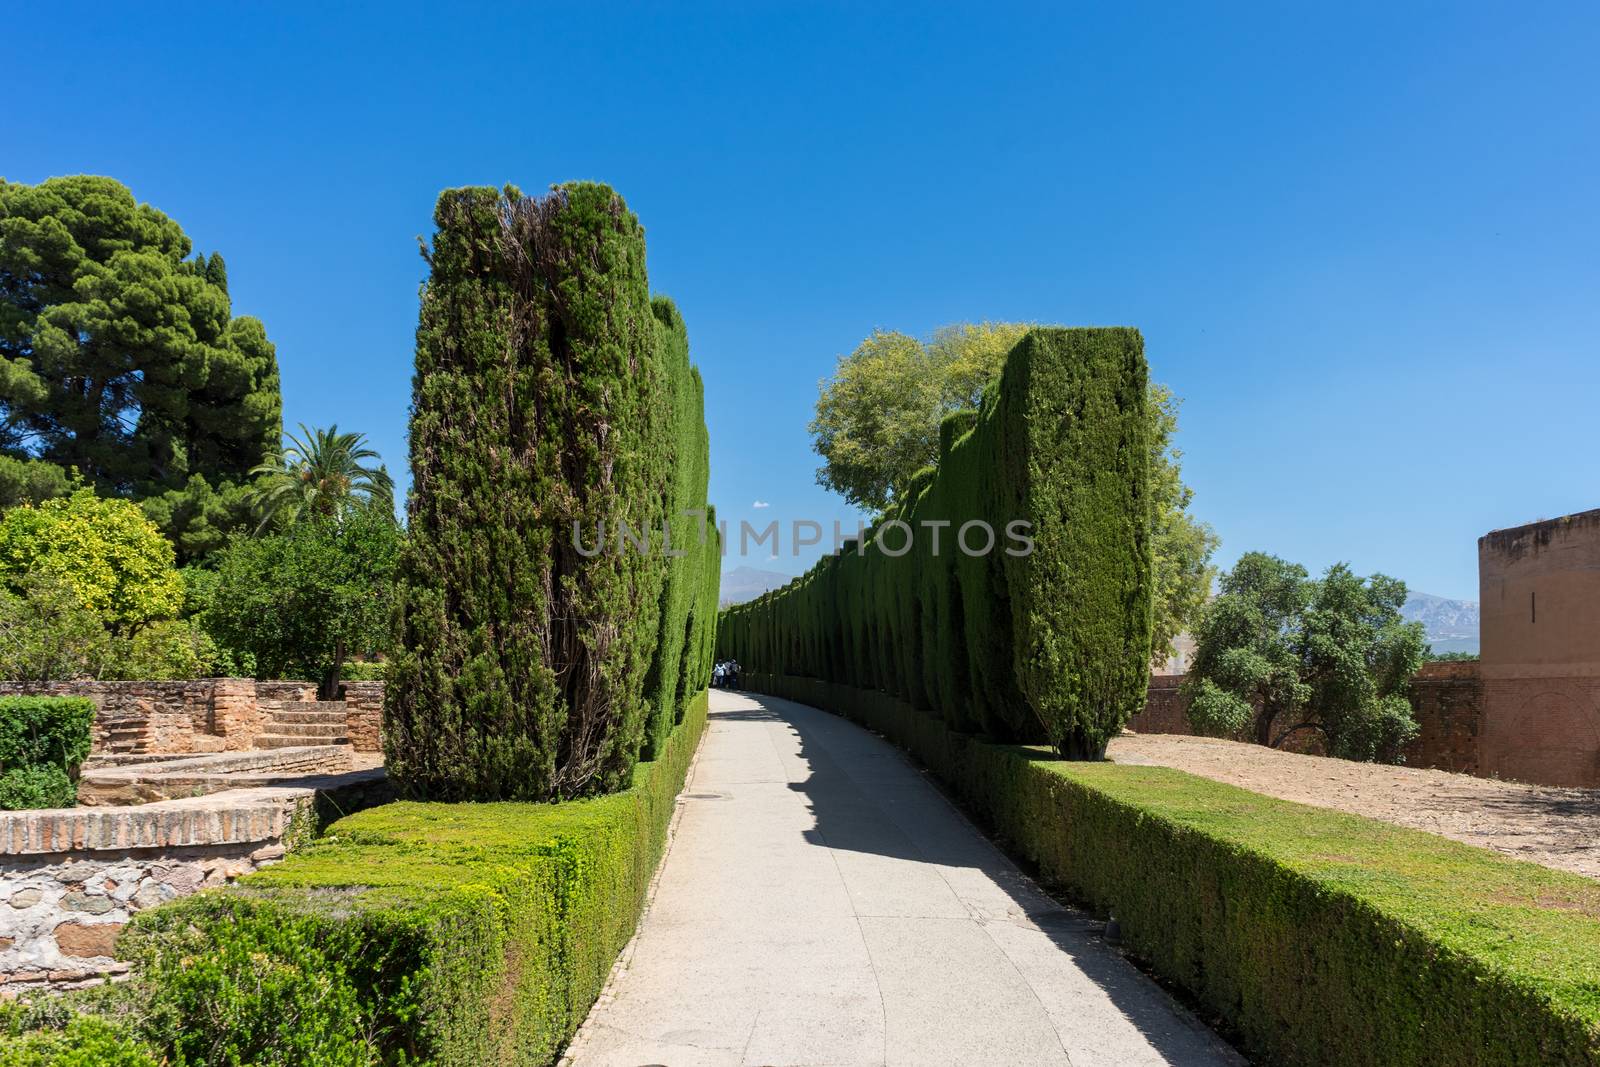 Tree lined curved pathway in beautiful gardens of the ancient Alhambra Palace in Granada on the Costa del Sol in Spain, Europe on a sunny day with blue sky